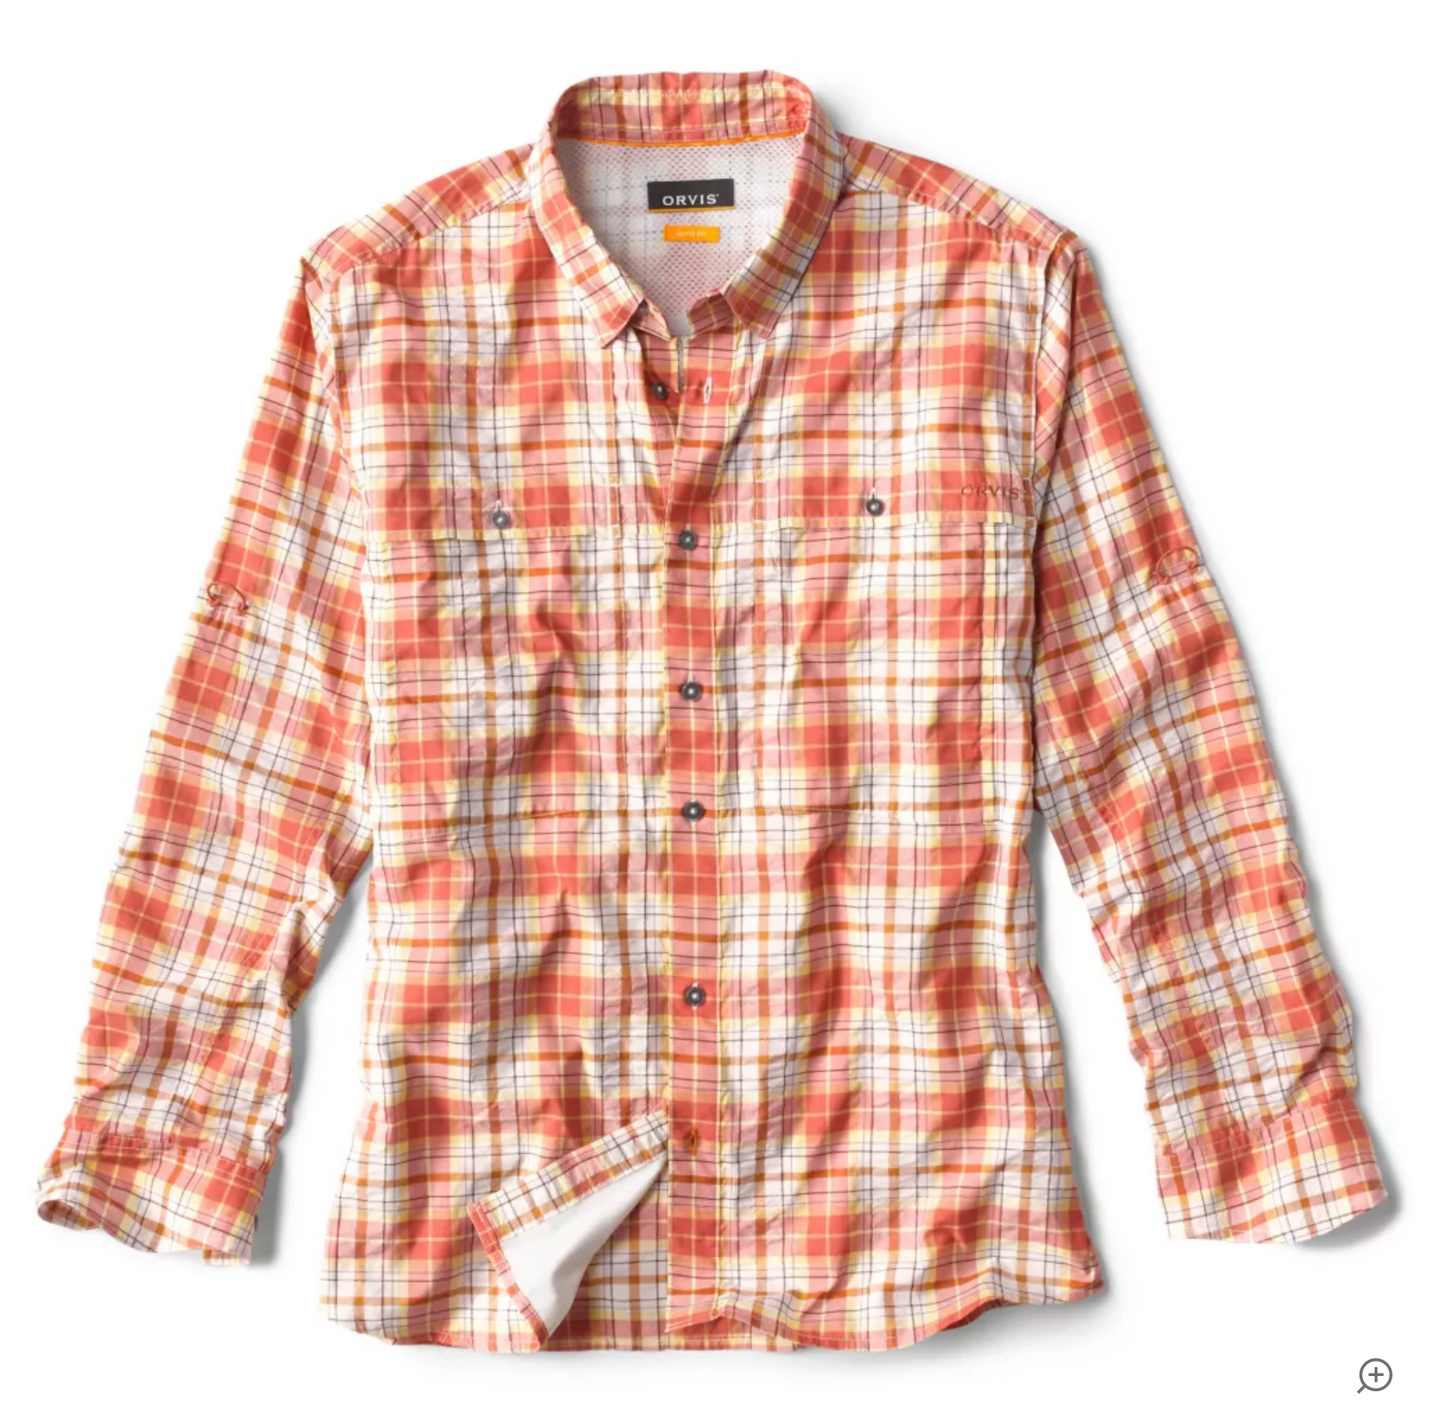 Orvis Long-Sleeved Open Air Caster - Regular - Washed Sienna Plaid